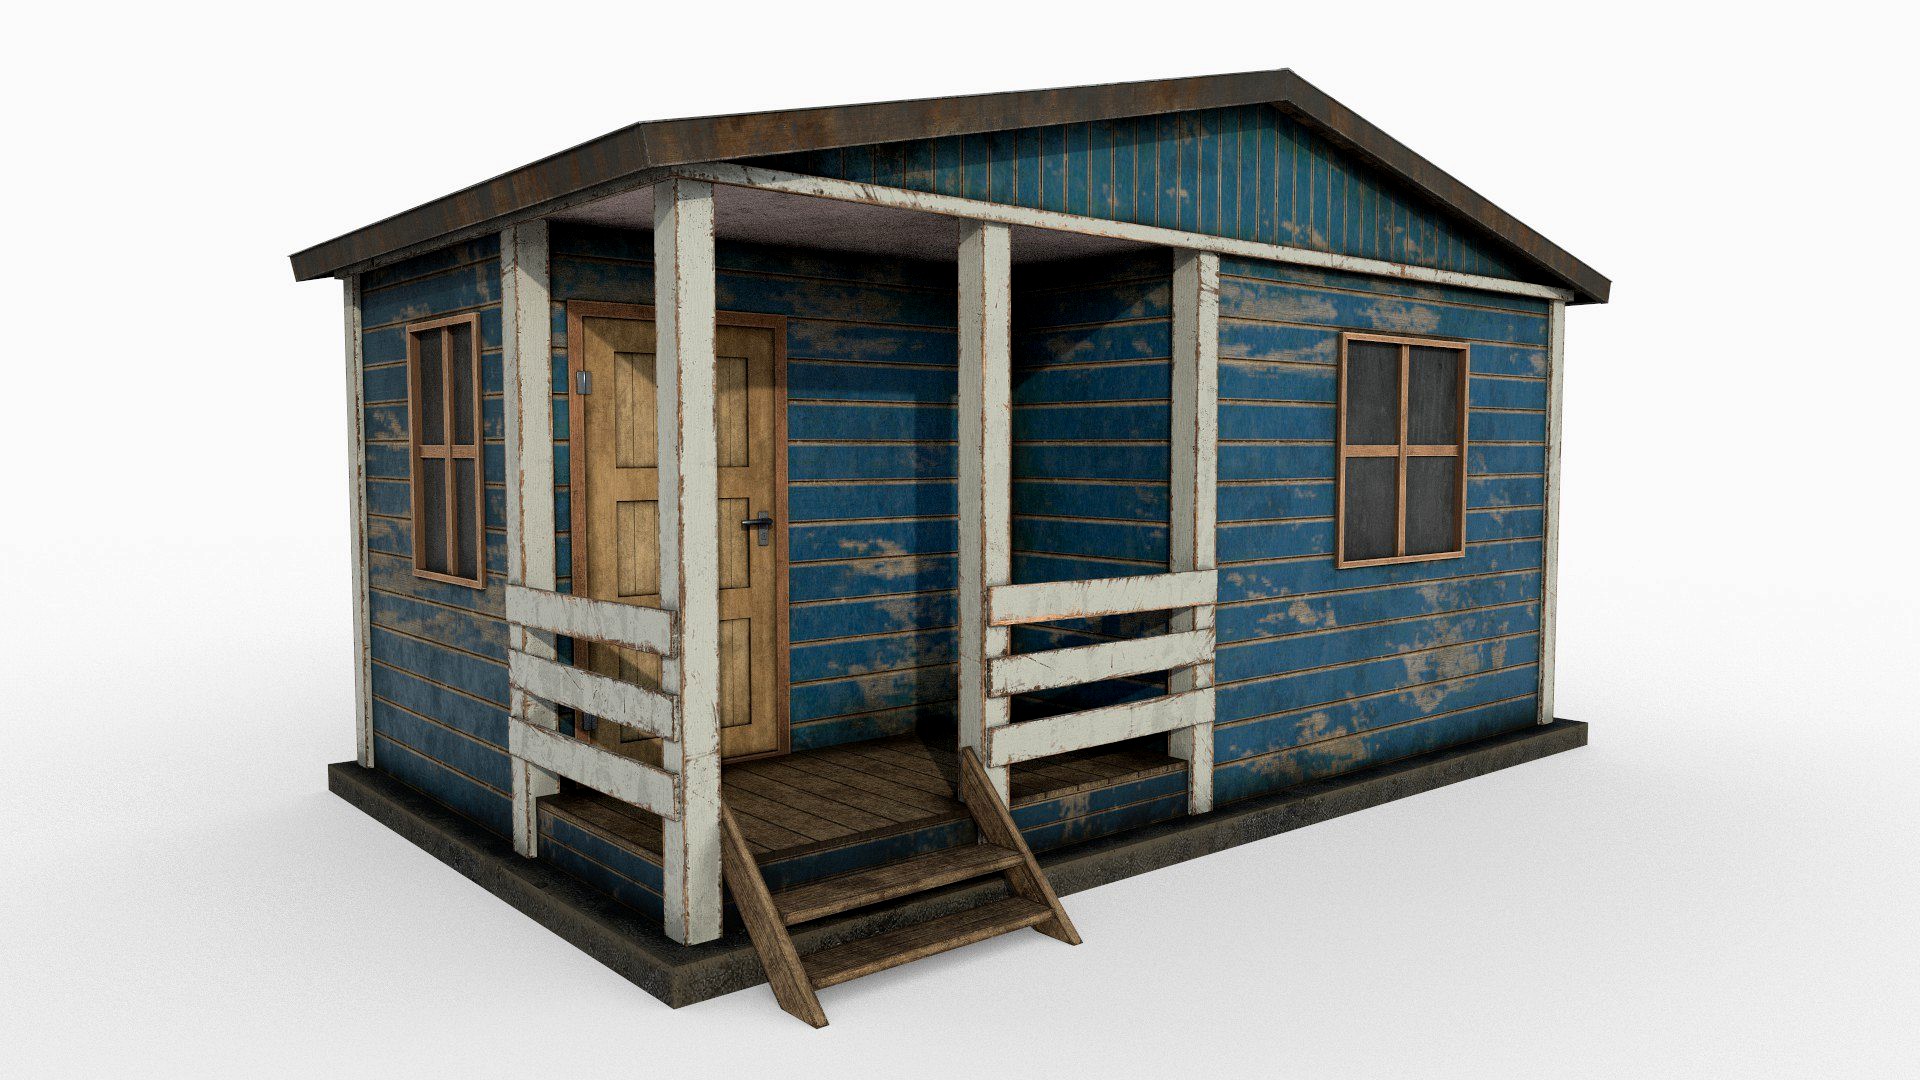 Worn Shed